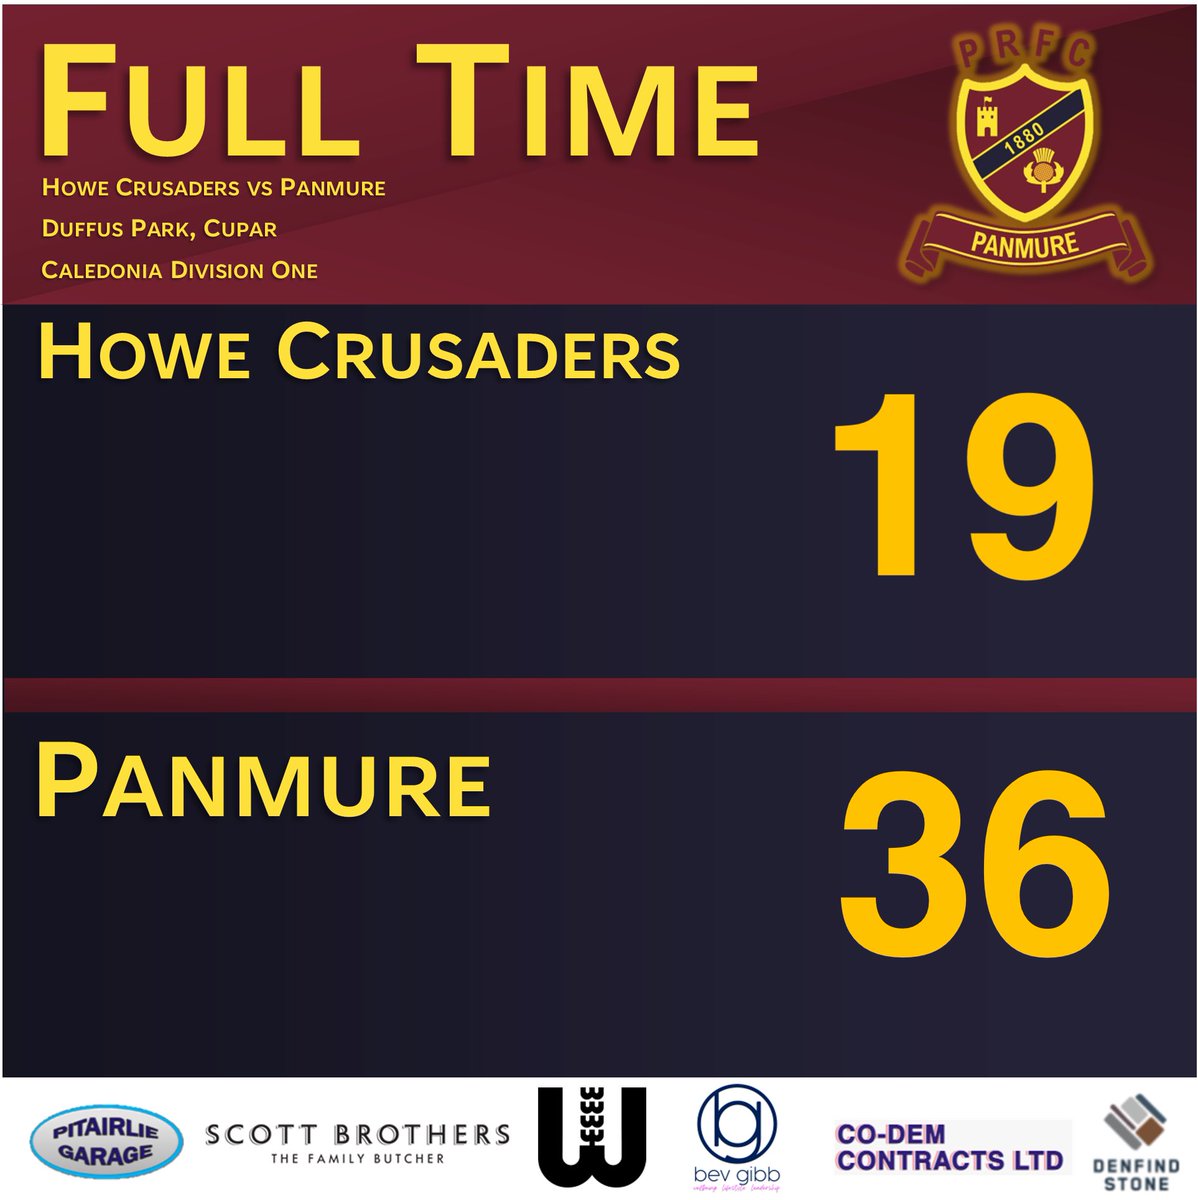 Full time in Cupar: Howe Crusaders 19-36 Panmure

Panny make it 7 wins from 7 in the 1st half of the league season.

Try Scorers: Chris Cruickshank x2, Angus Lindsay, Gordon Gray, Kyle Davidson and Graham Hopkins

#PlayUpPanmure